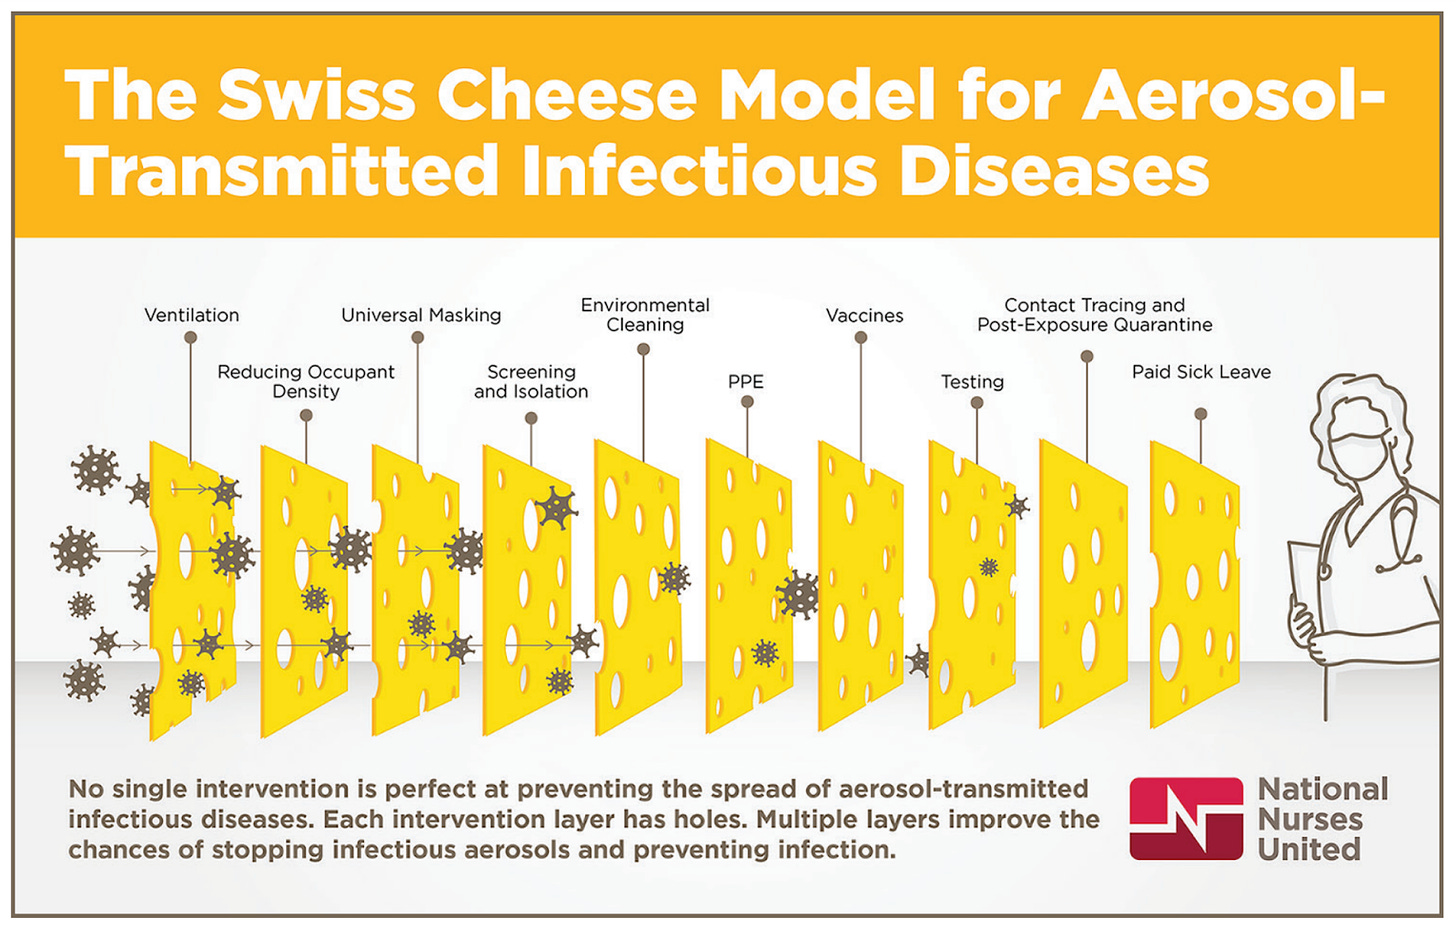 The Swiss Cheese Model for Aerosol- Transmitted Infectious Diseases Ventilation Universal Masking Reducing Occupant Density Environmental Cleaning Screening and Isolation Vaccines PPE Contact Tracing and Post-Exposure Quarantine Paid Sick Leave Testing No single intervention is perfect at preventing the spread of aerosol-transmitted infectious diseases. Each intervention layer has holes. Multiple layers improve the chances of stopping infectious aerosols and preventing infection. Nurses’ Guide to Improving Indoor Air Quality in Health Care by National Nurses United